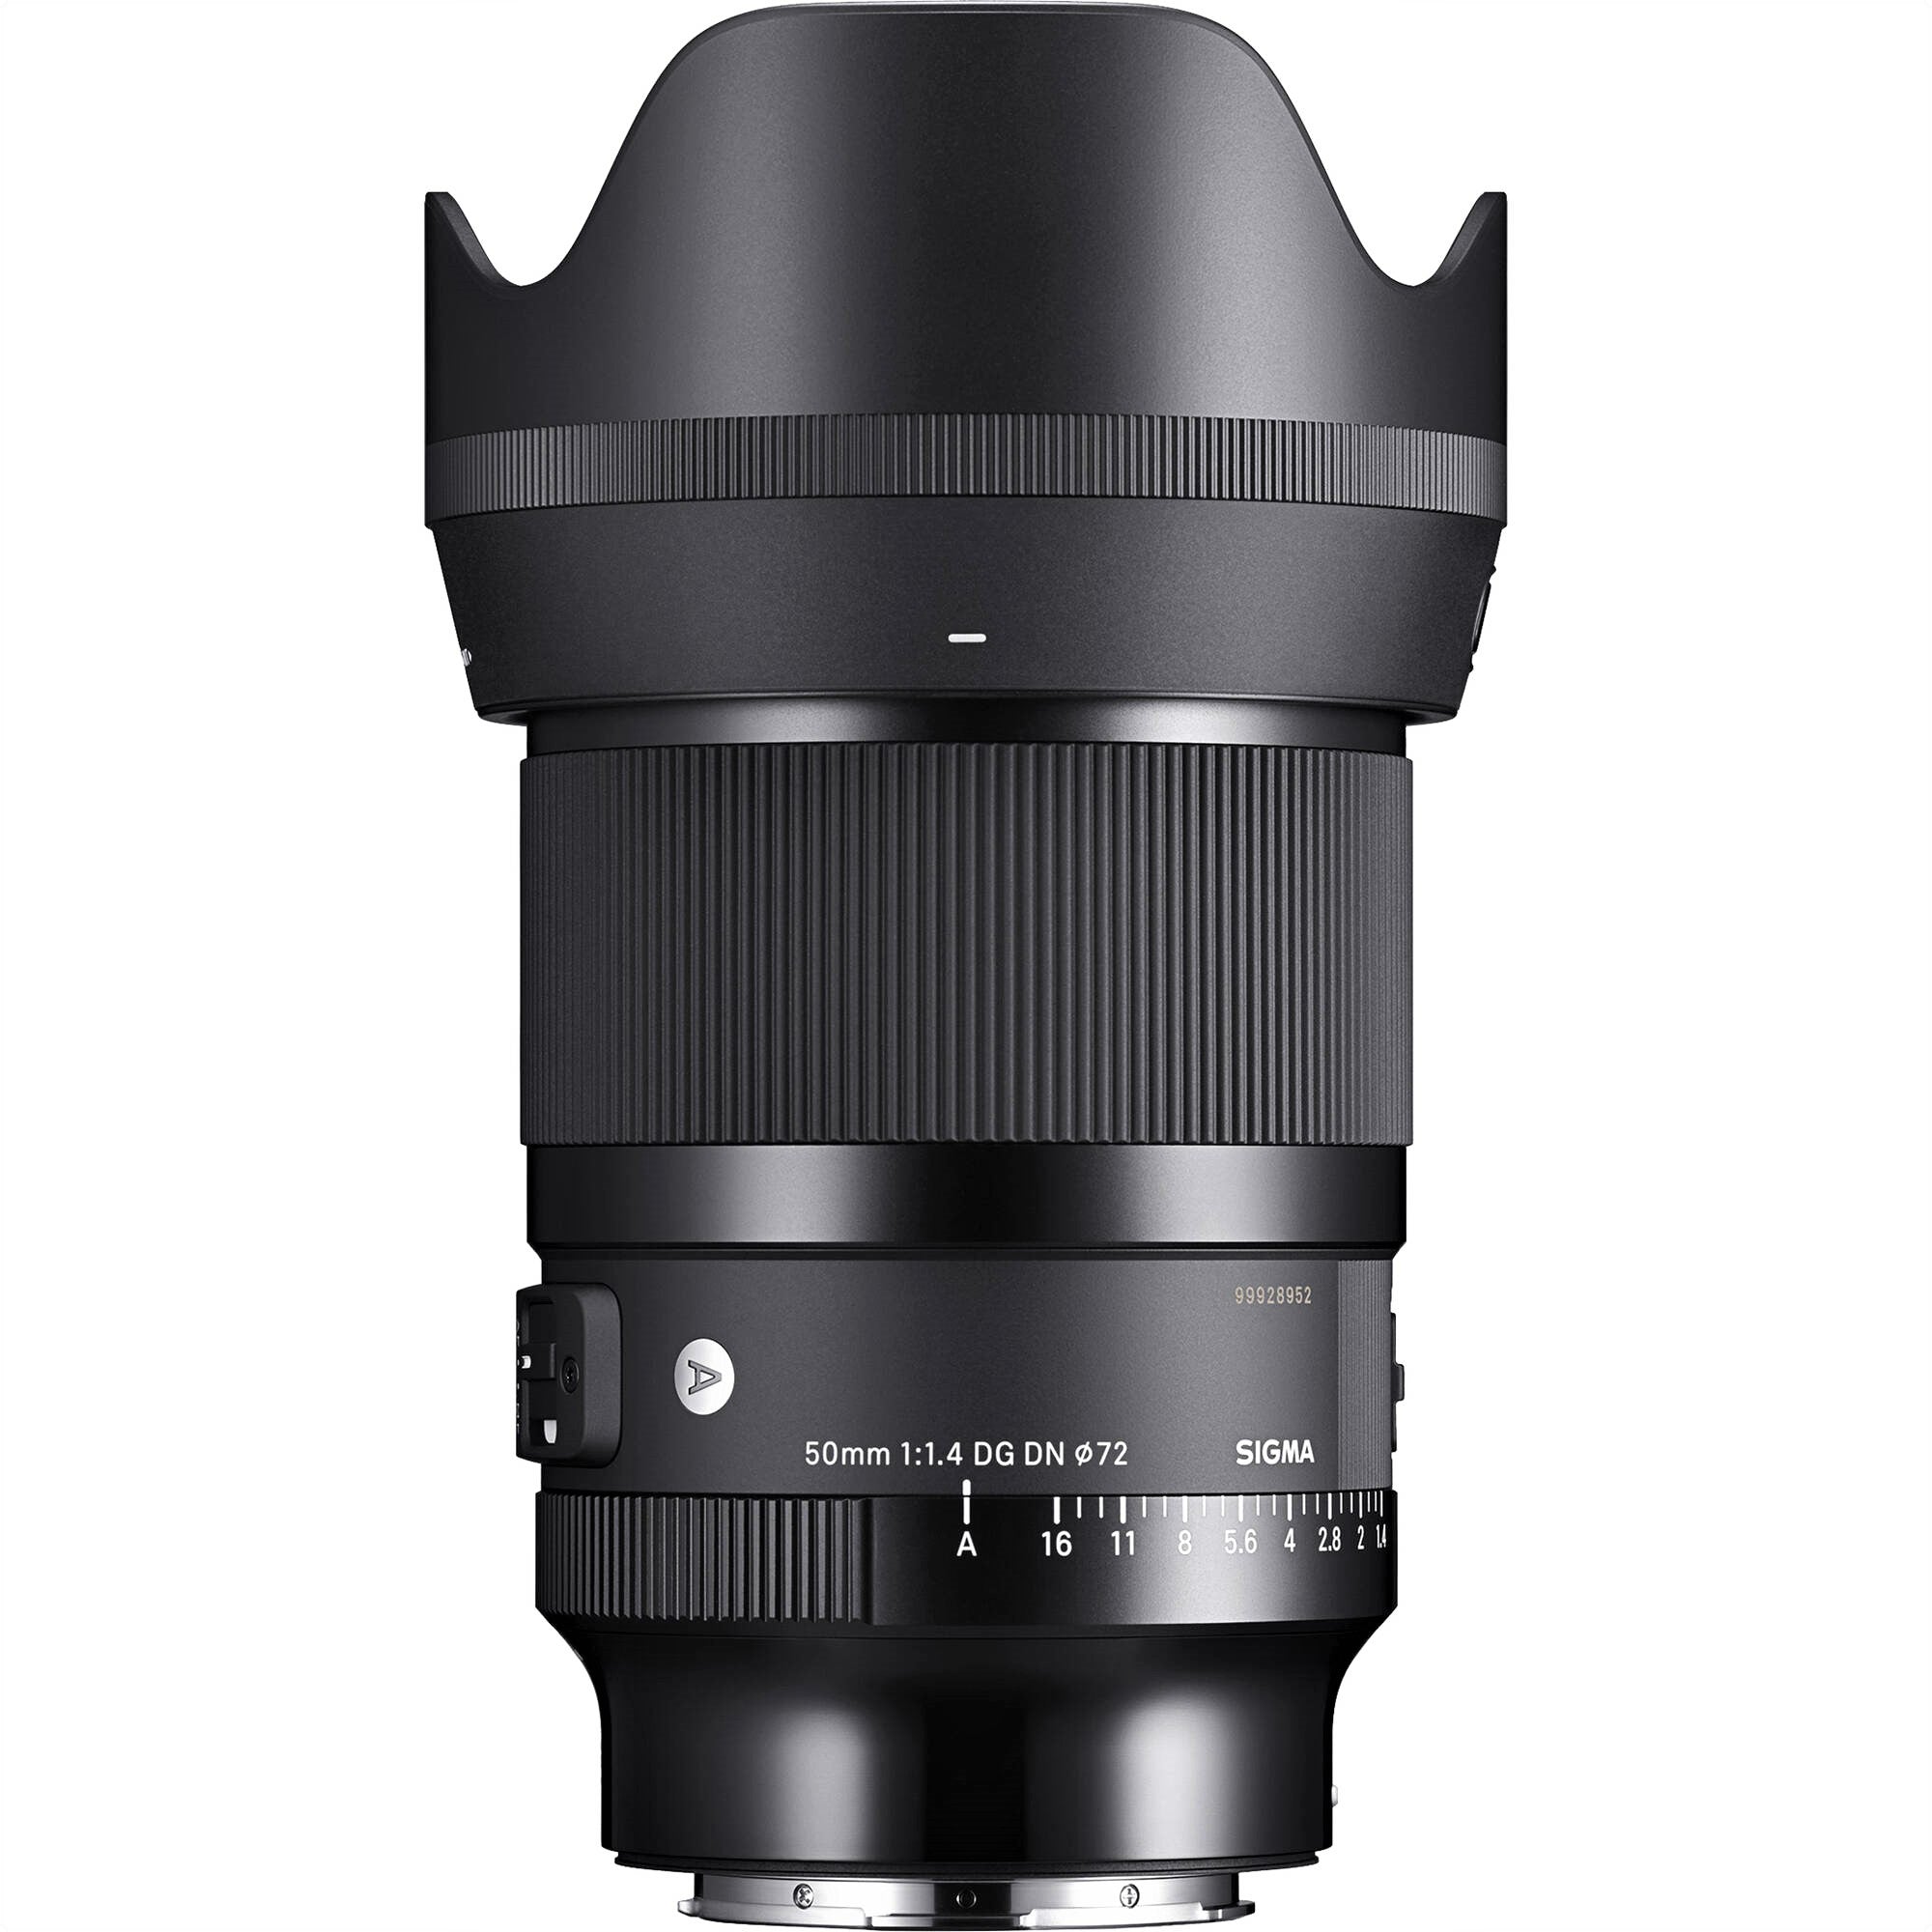 Sigma 50mm F1.4 DG DN Art Lens for Leica L with Attached Lens Hood on the Top